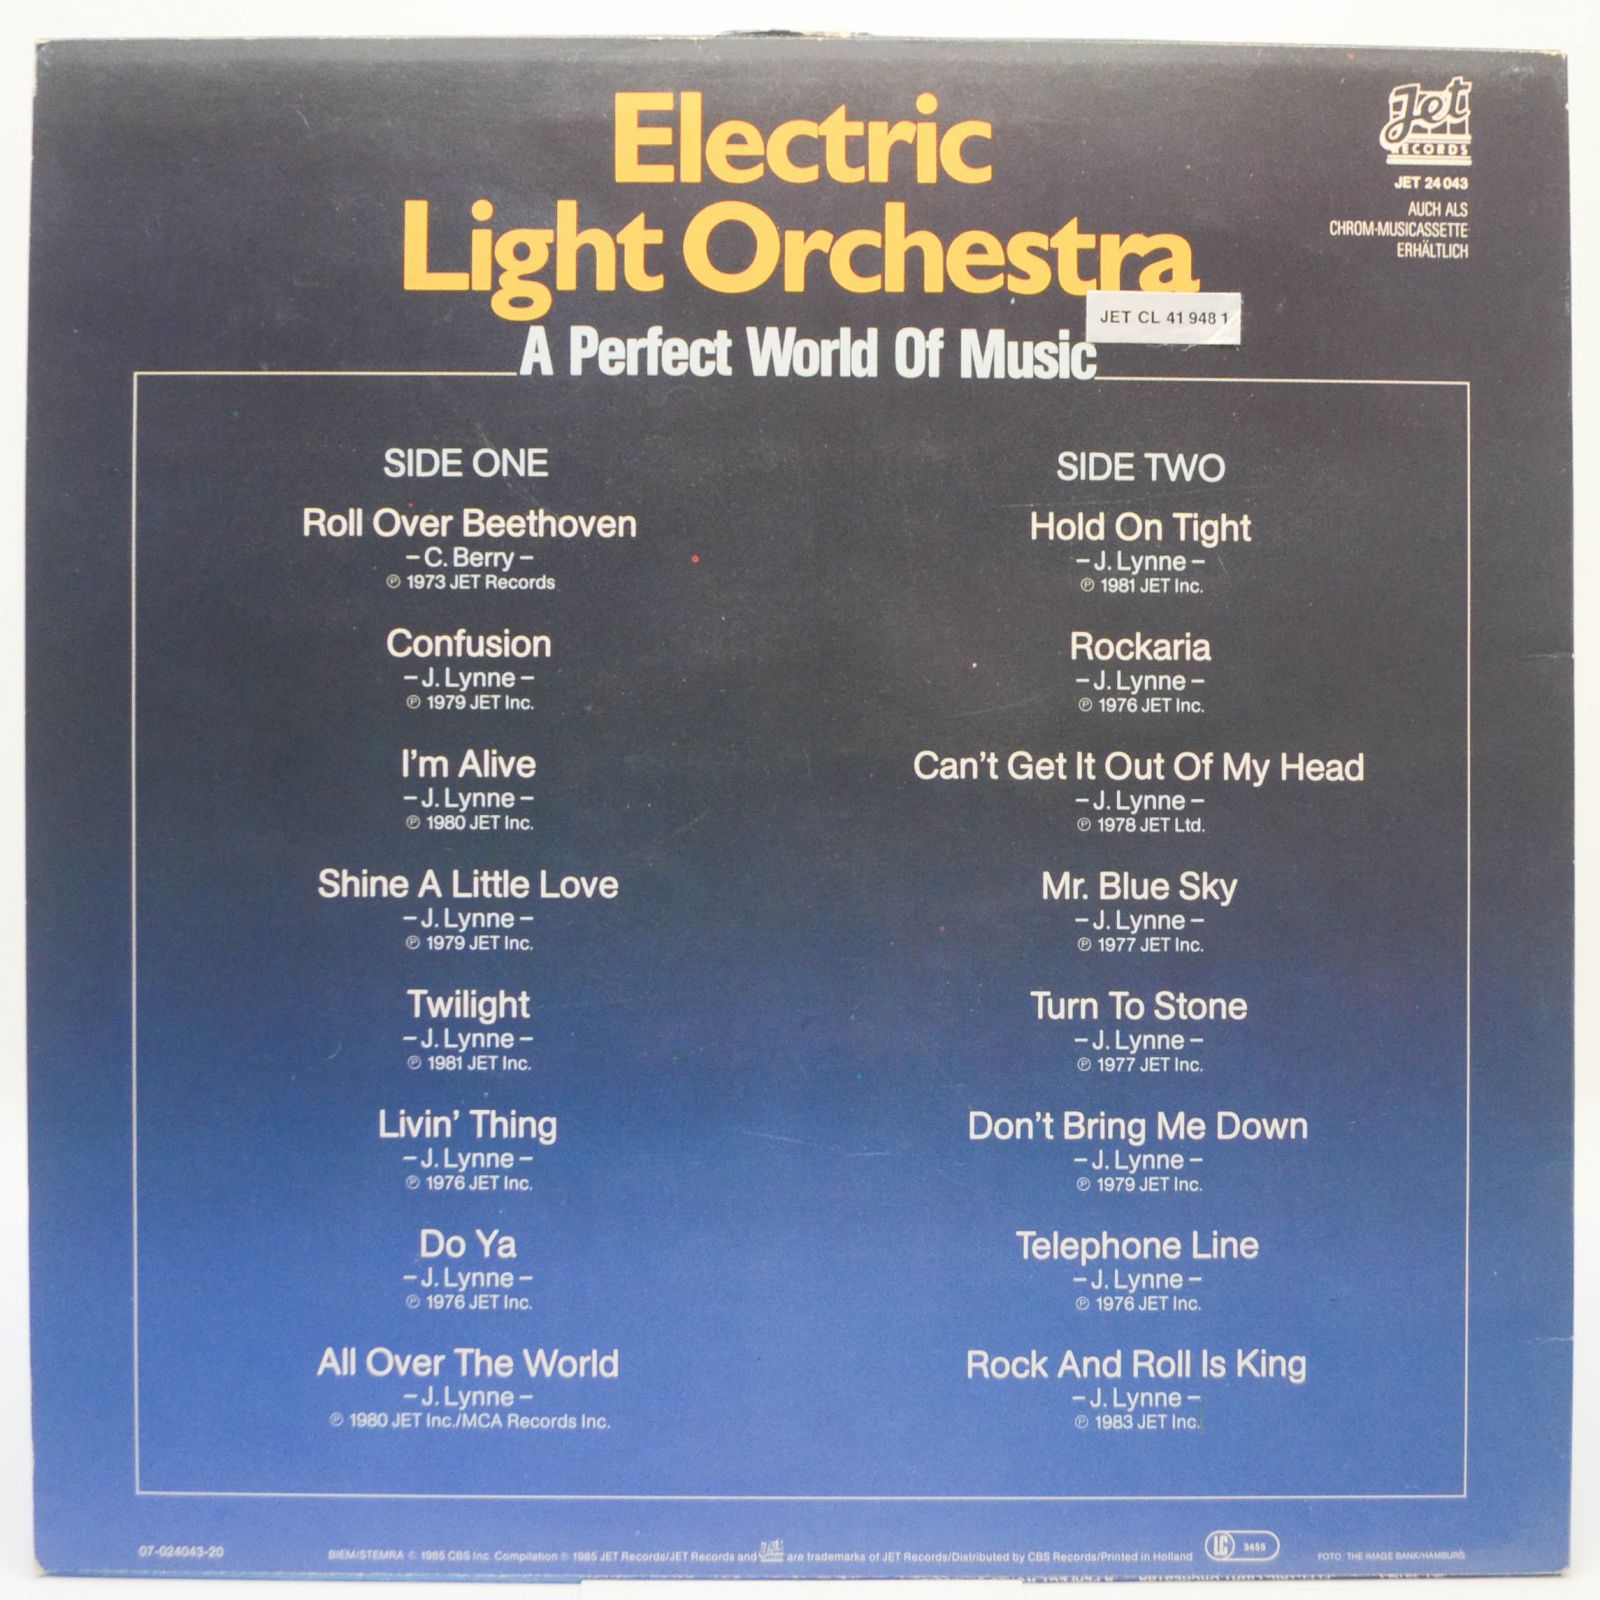 Electric Light Orchestra — A Perfect World Of Music, 1985